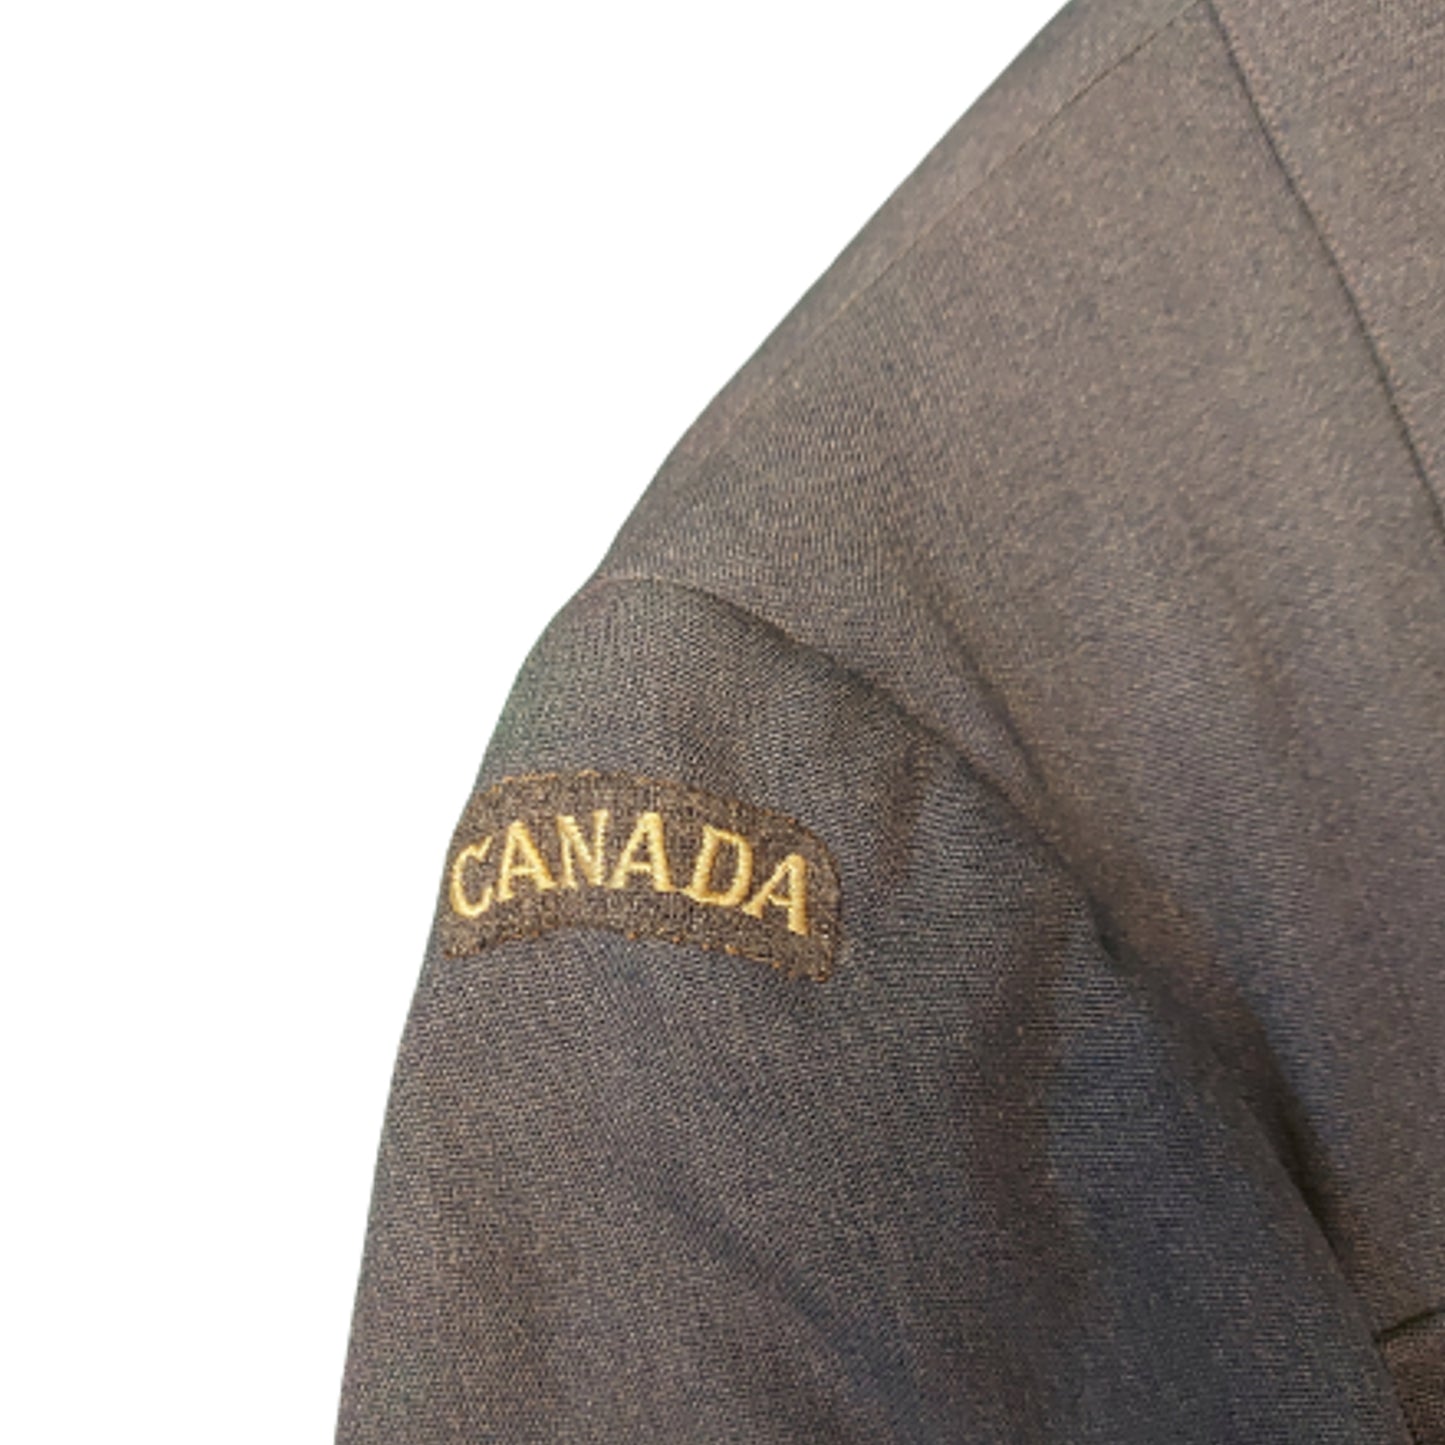 WW2 Canadian RCAF Air Gunner Service Dress Tunic -Air Crew Europe -DFC Recipient With Provenance